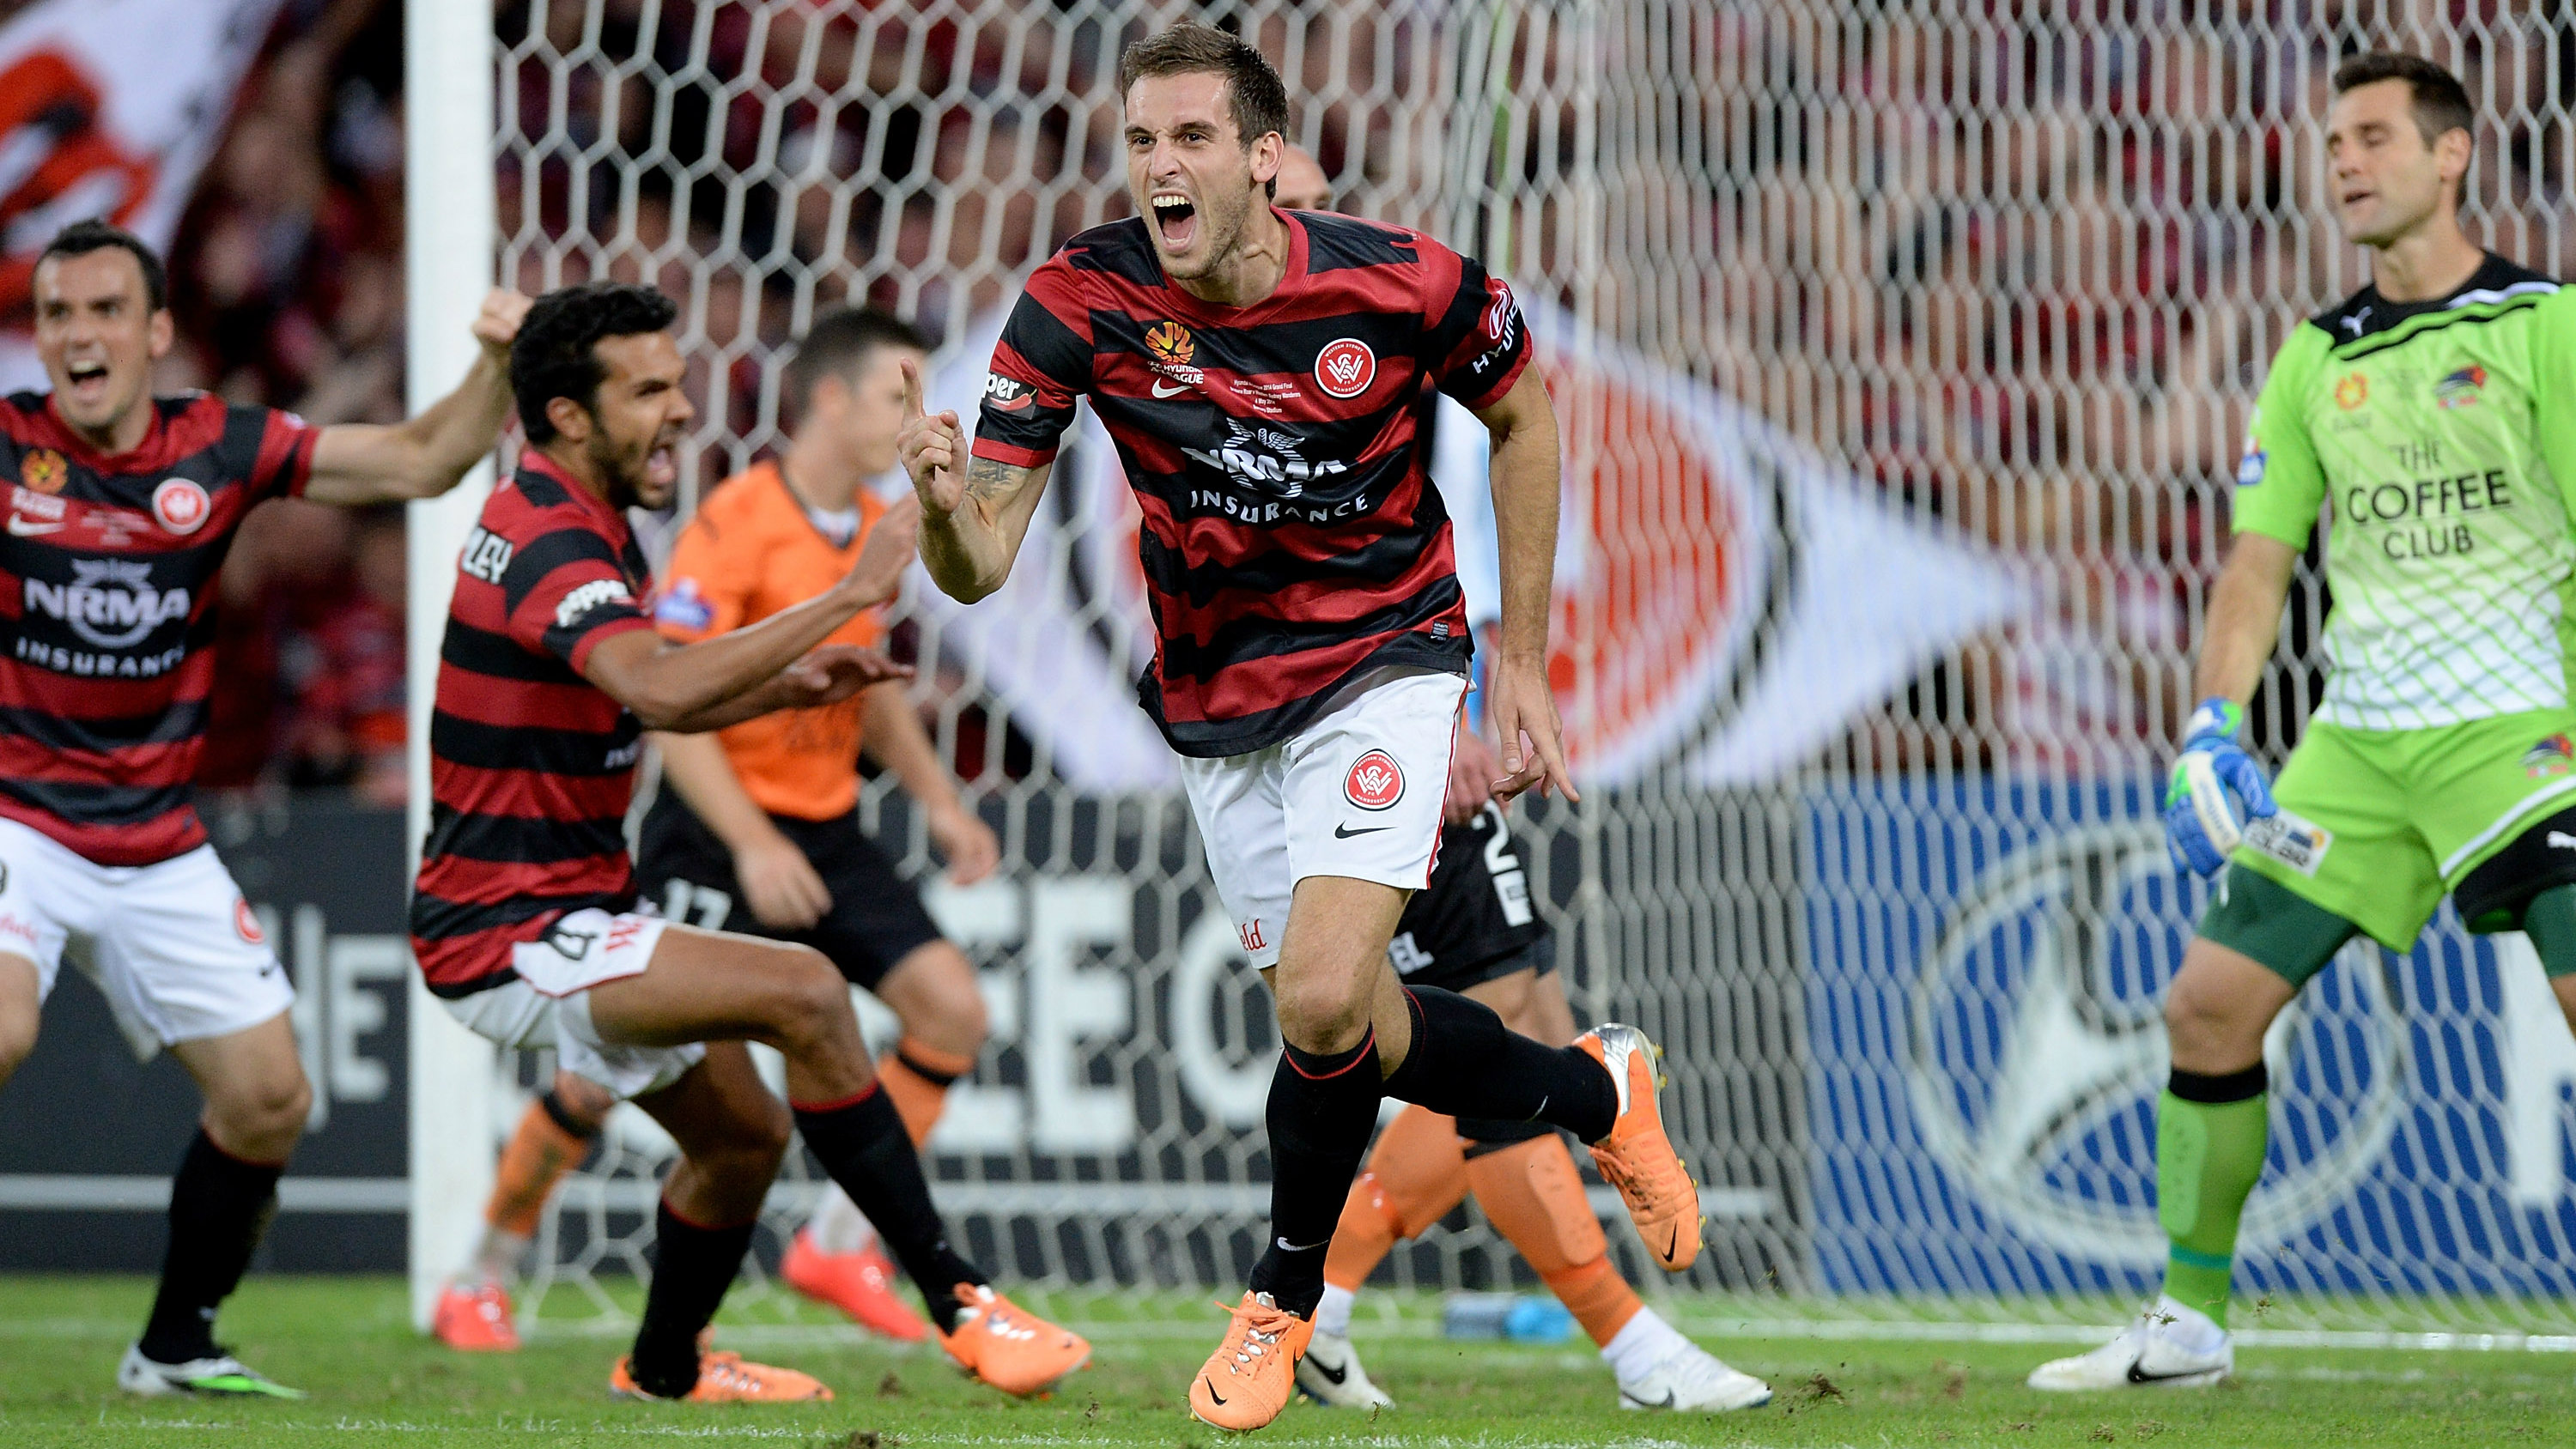 Matthew Spiranovic celebrates giving the Wanderers the lead in the 2014 Hyundai A-League grand final.